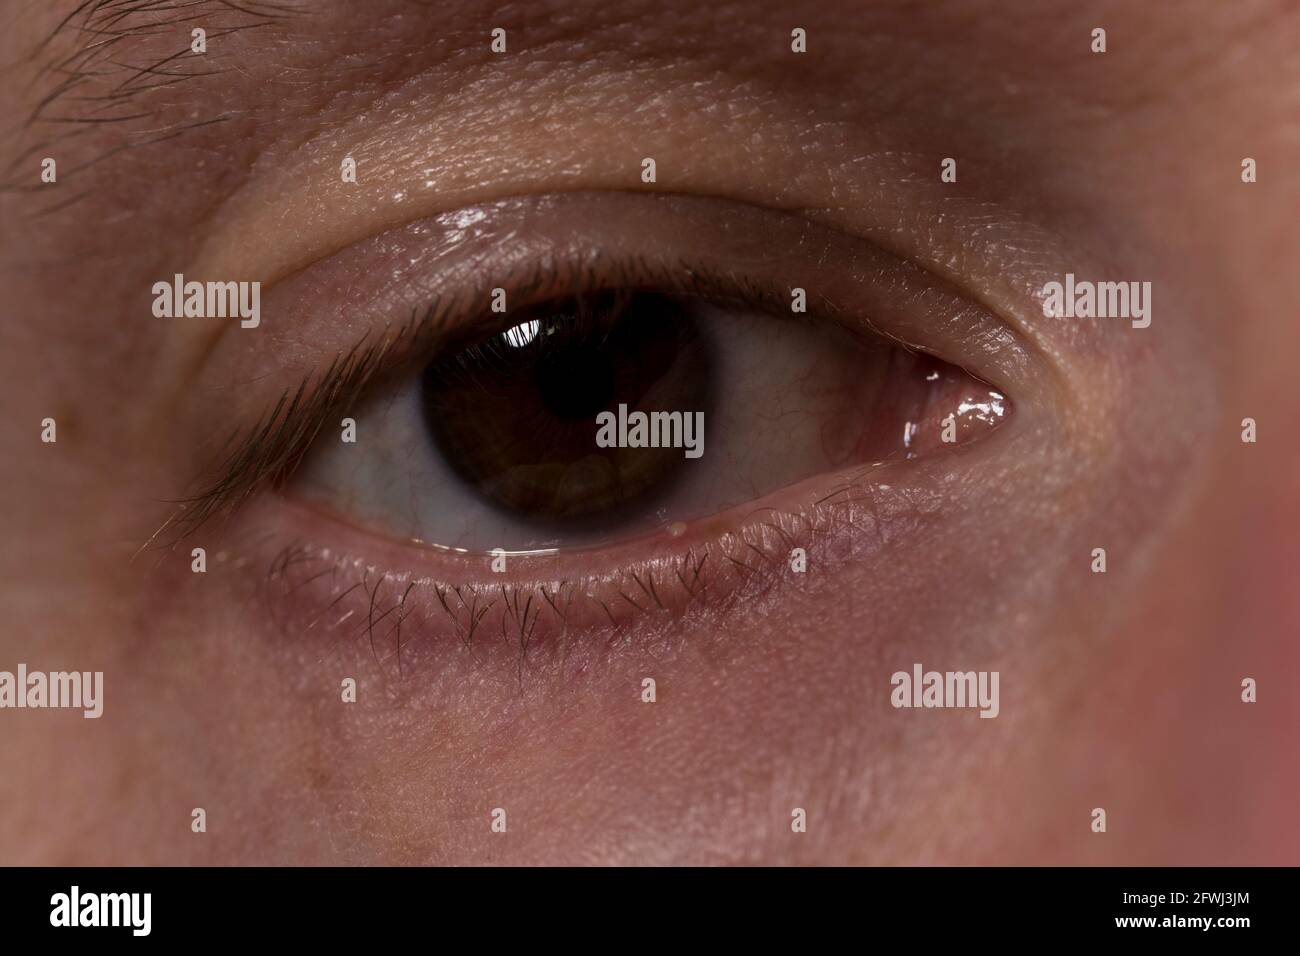 Stye close up eye infection pus on lower eye lid from chalazion infection. Stock Photo